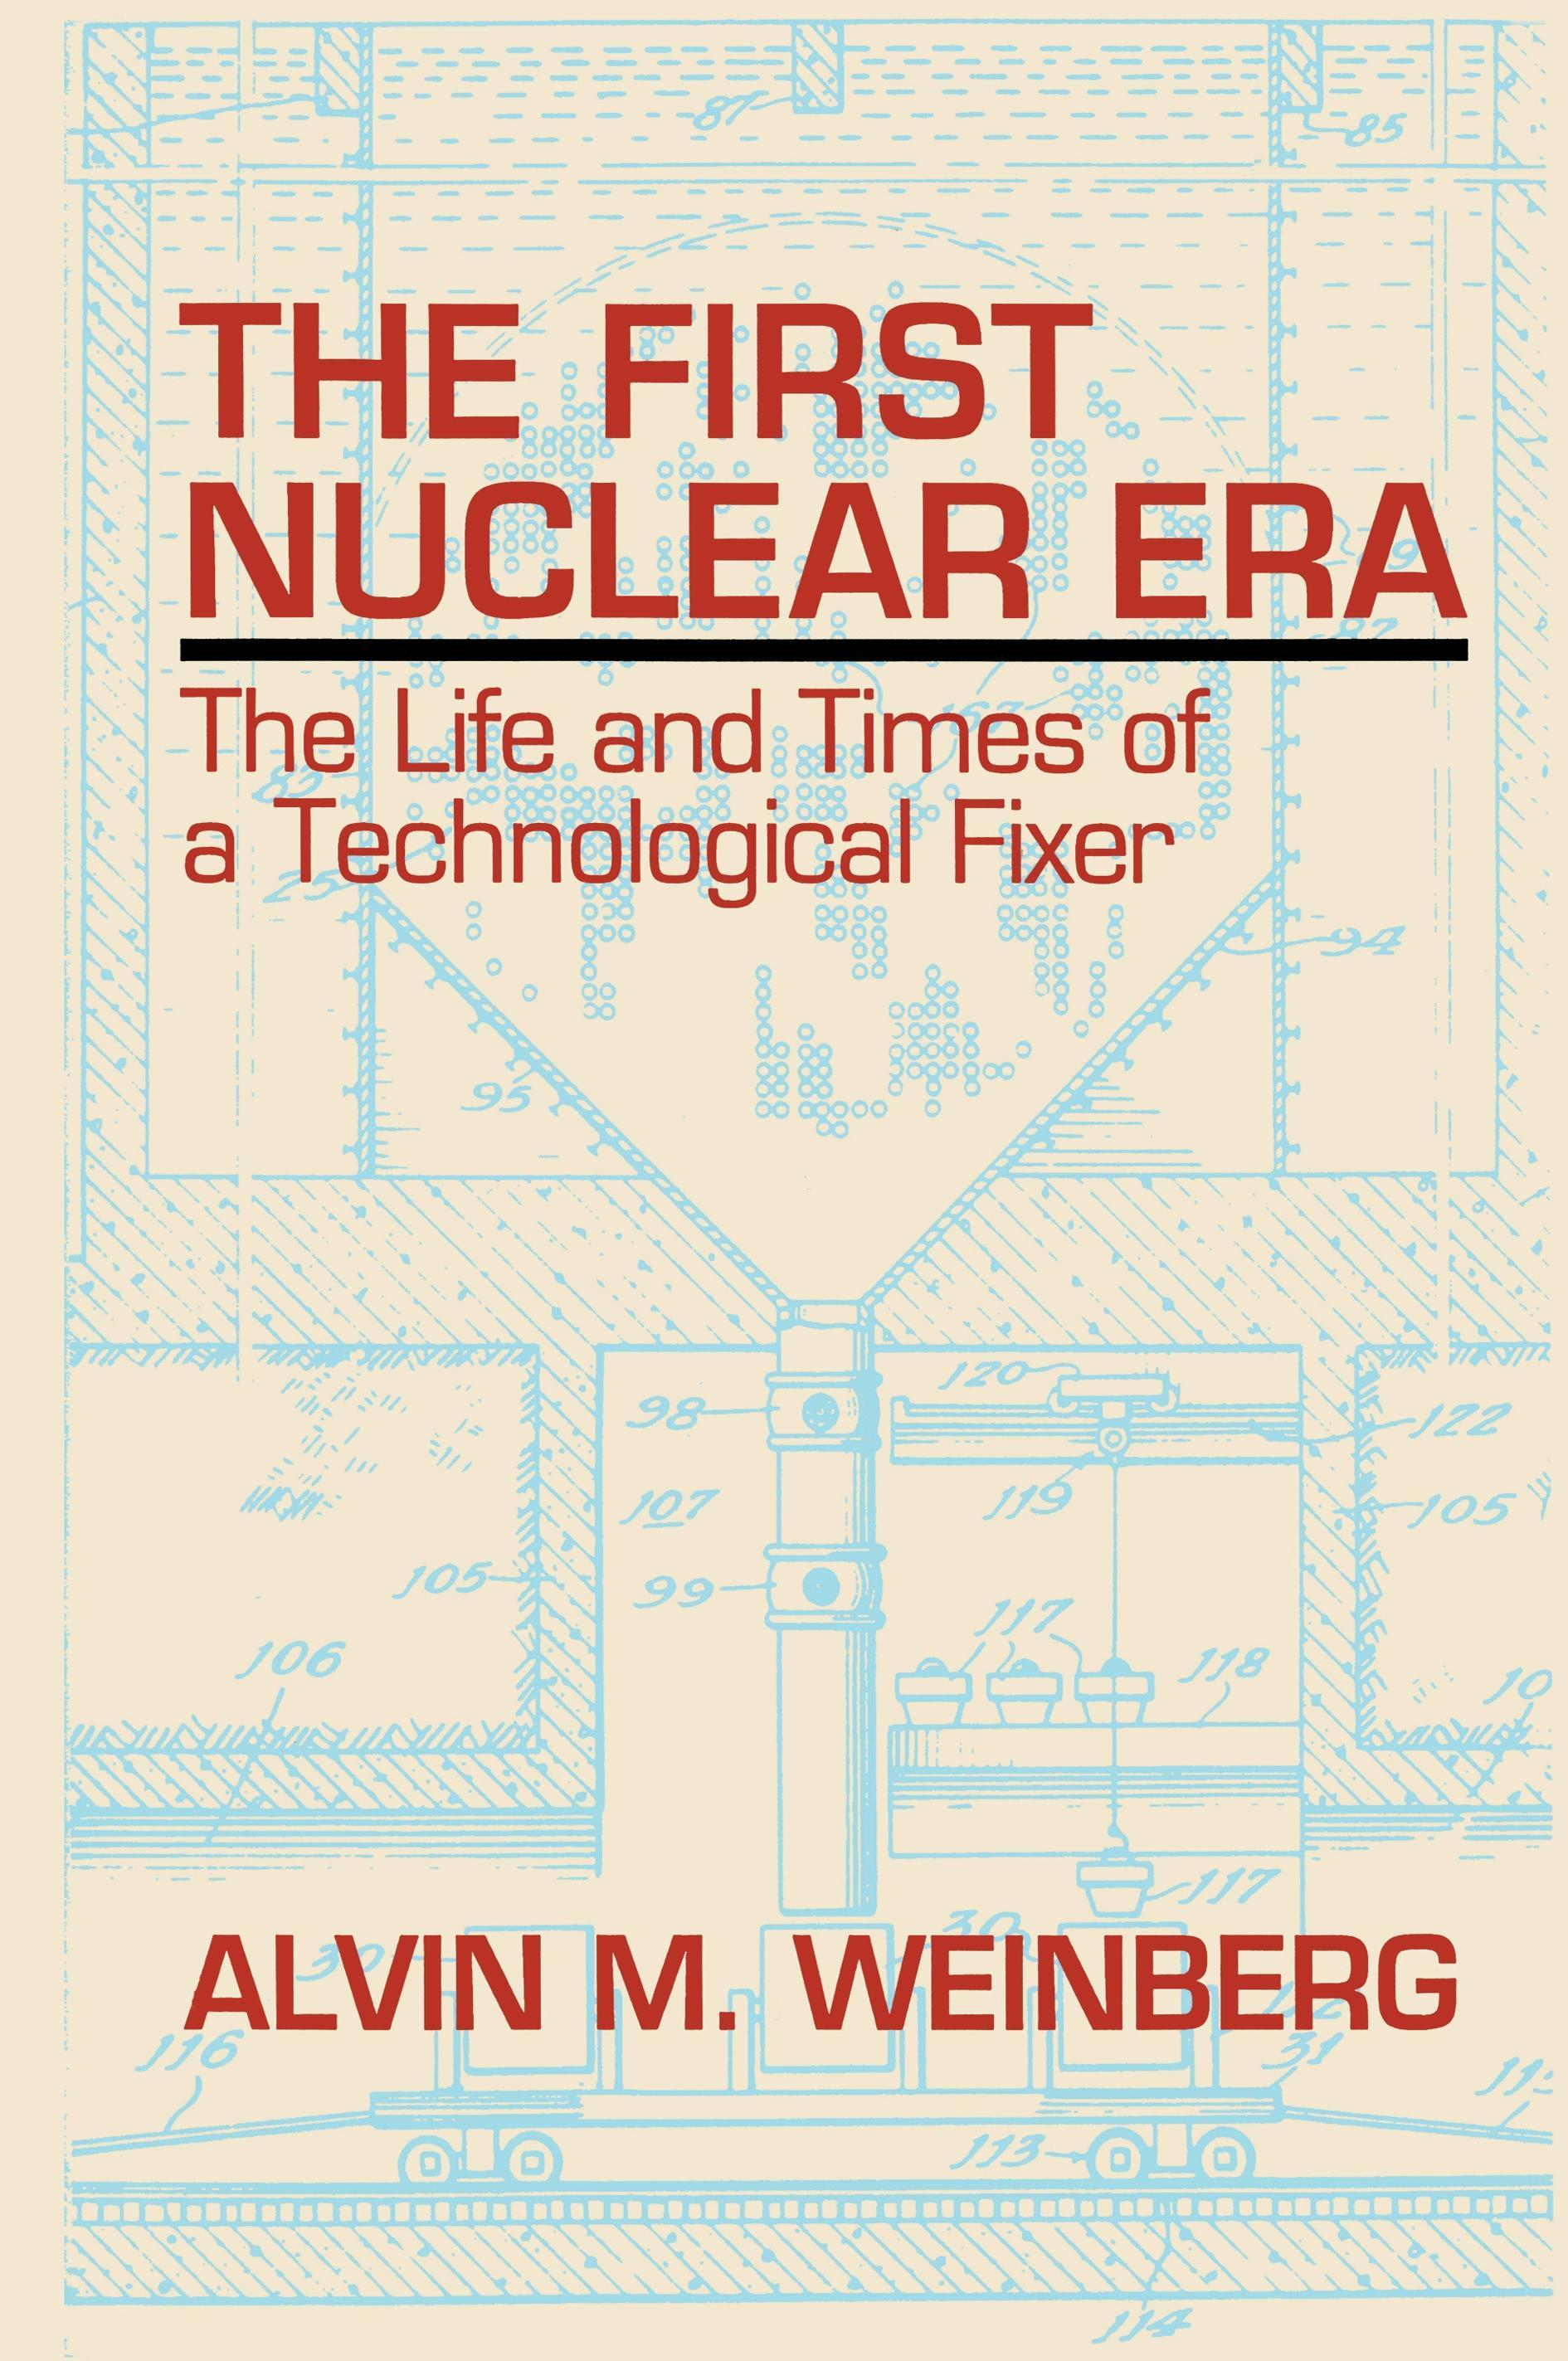 The First Nuclear Era - Alvin M. Weinberg